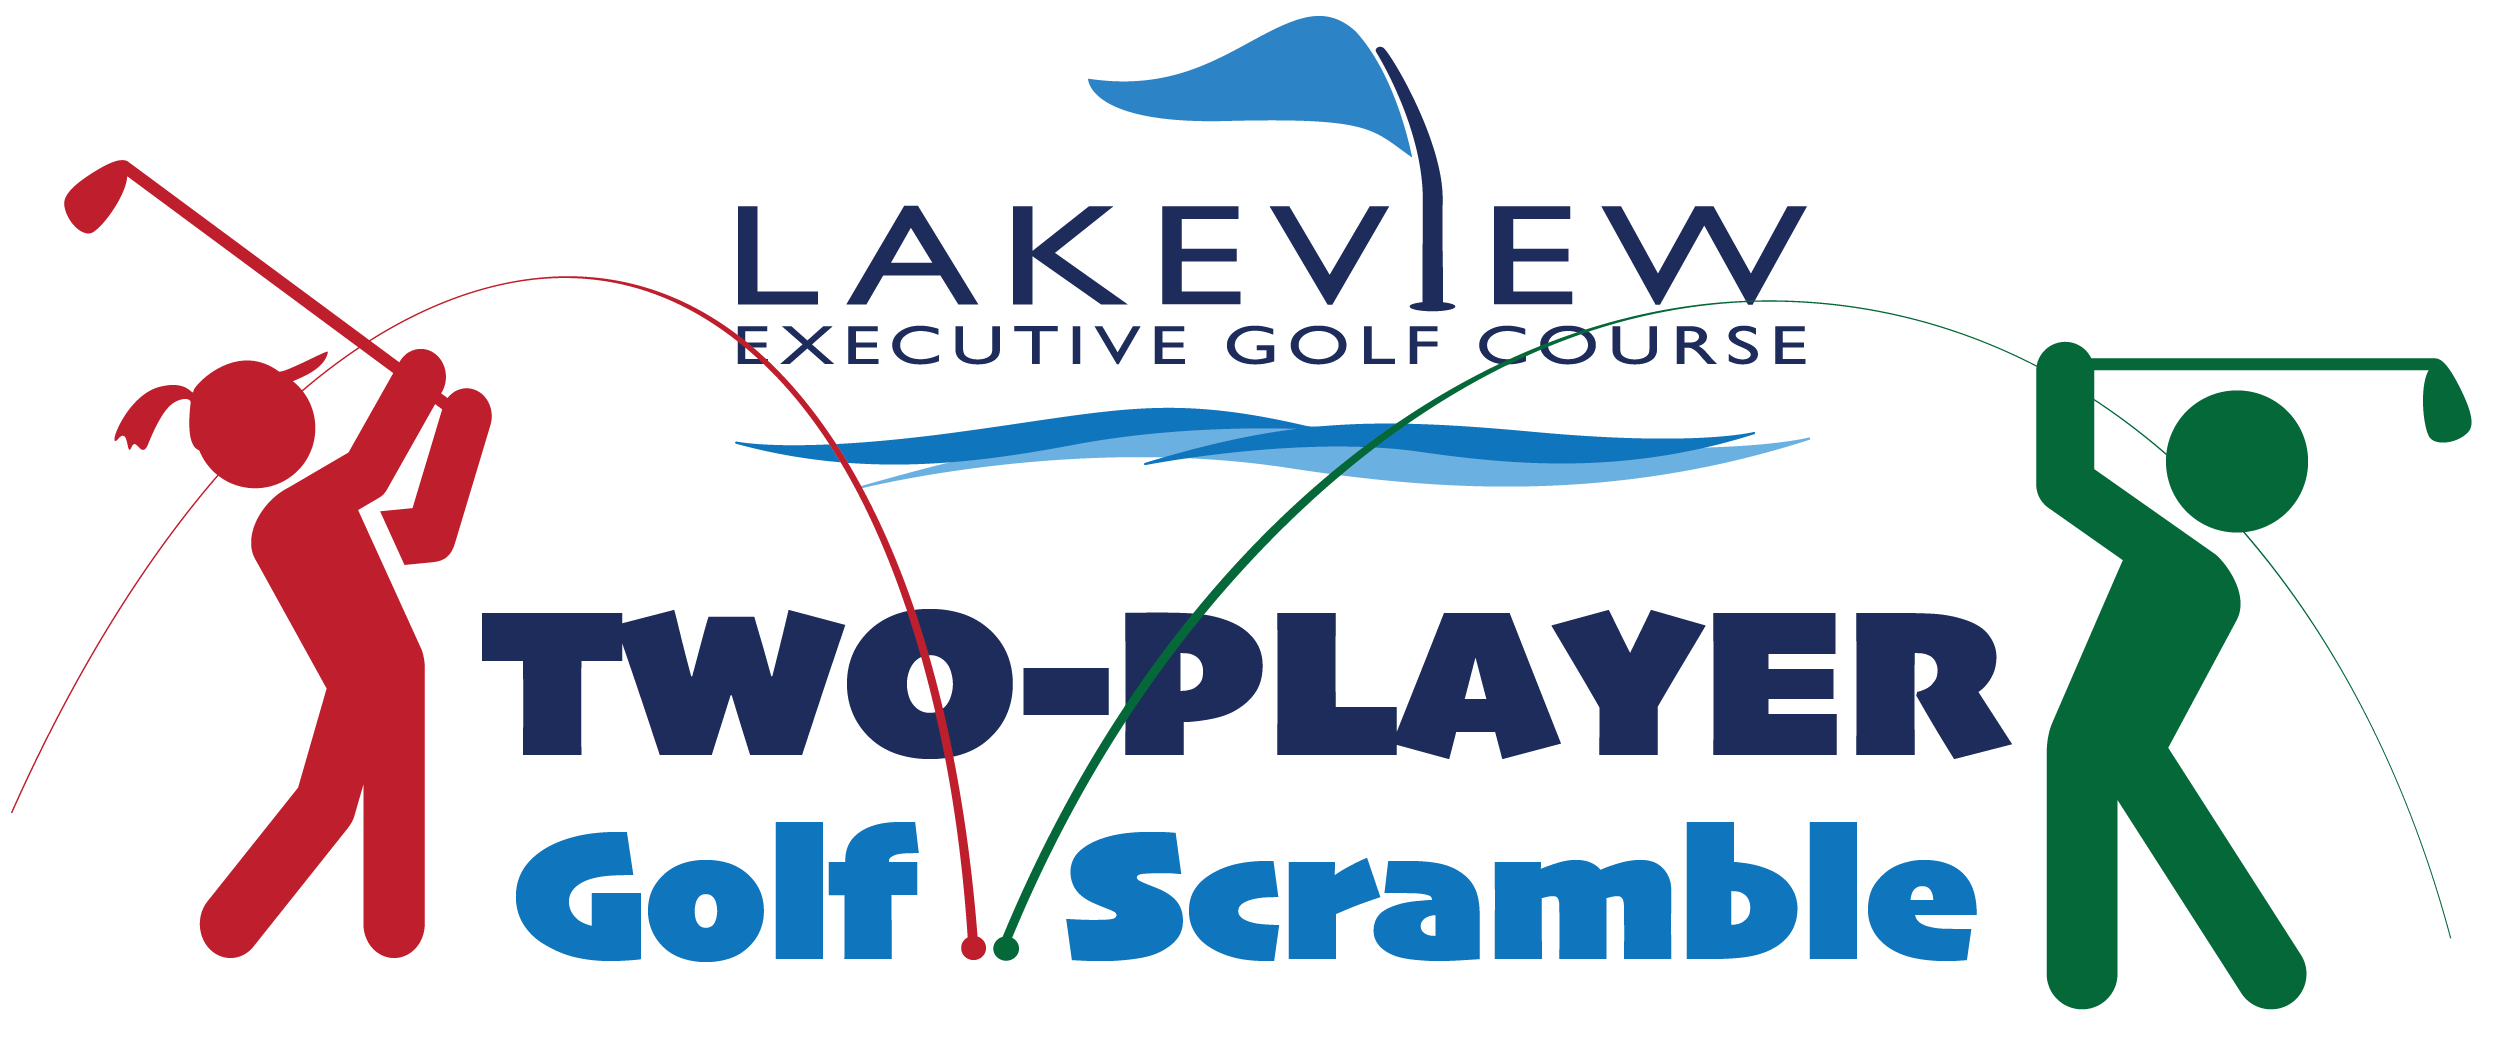 Two Player Scramble headline on illustration of two golfers